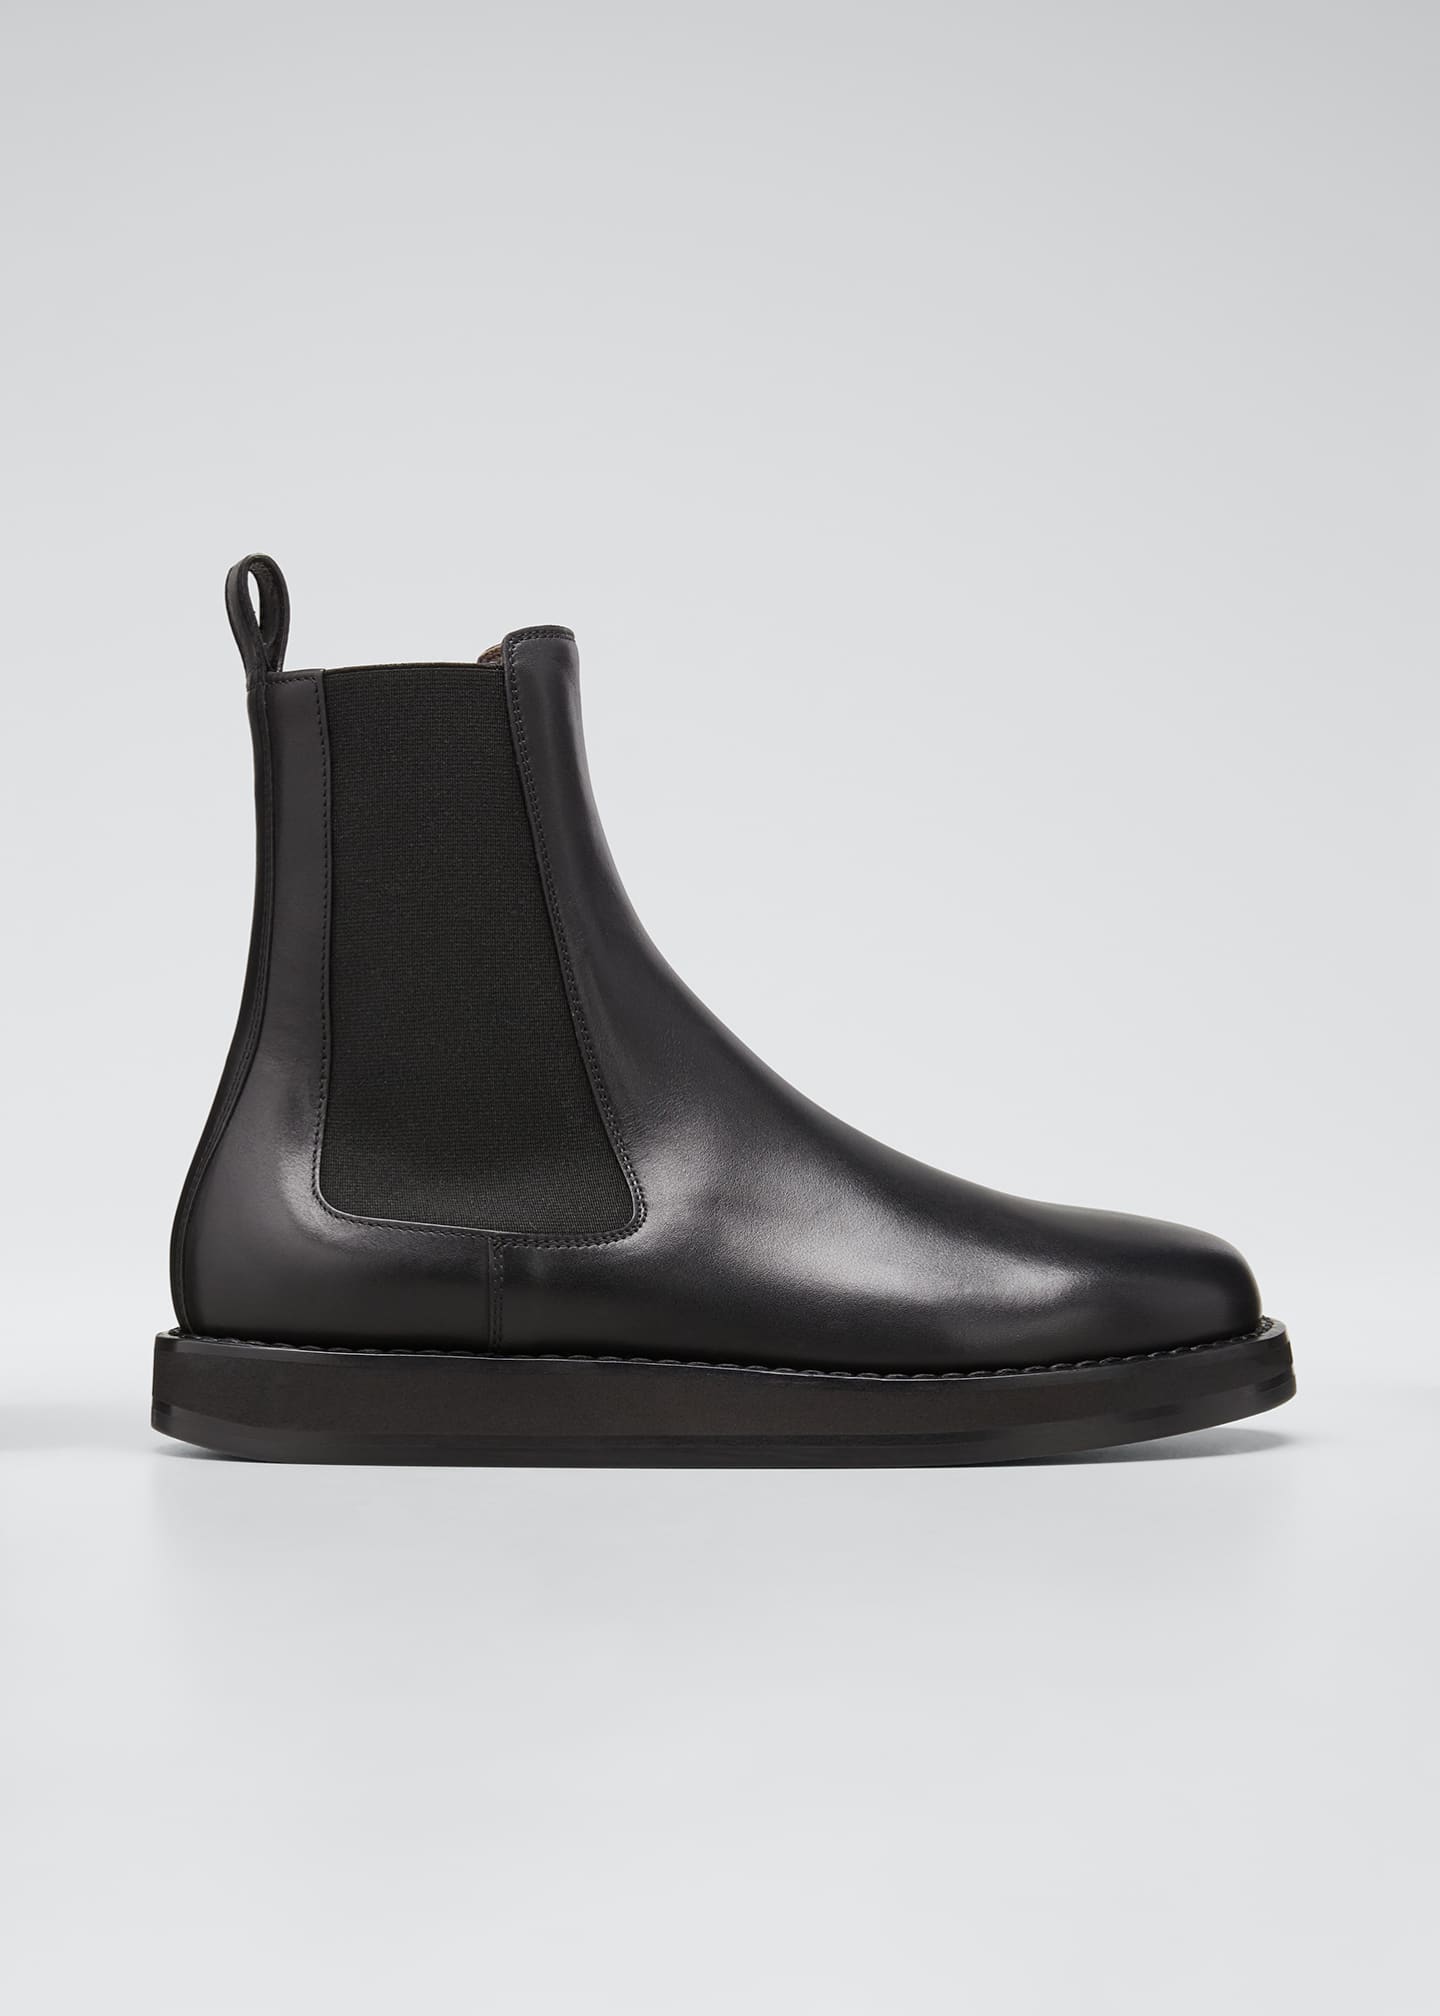 THE ROW Gaia Leather Gored Boots - Bergdorf Goodman